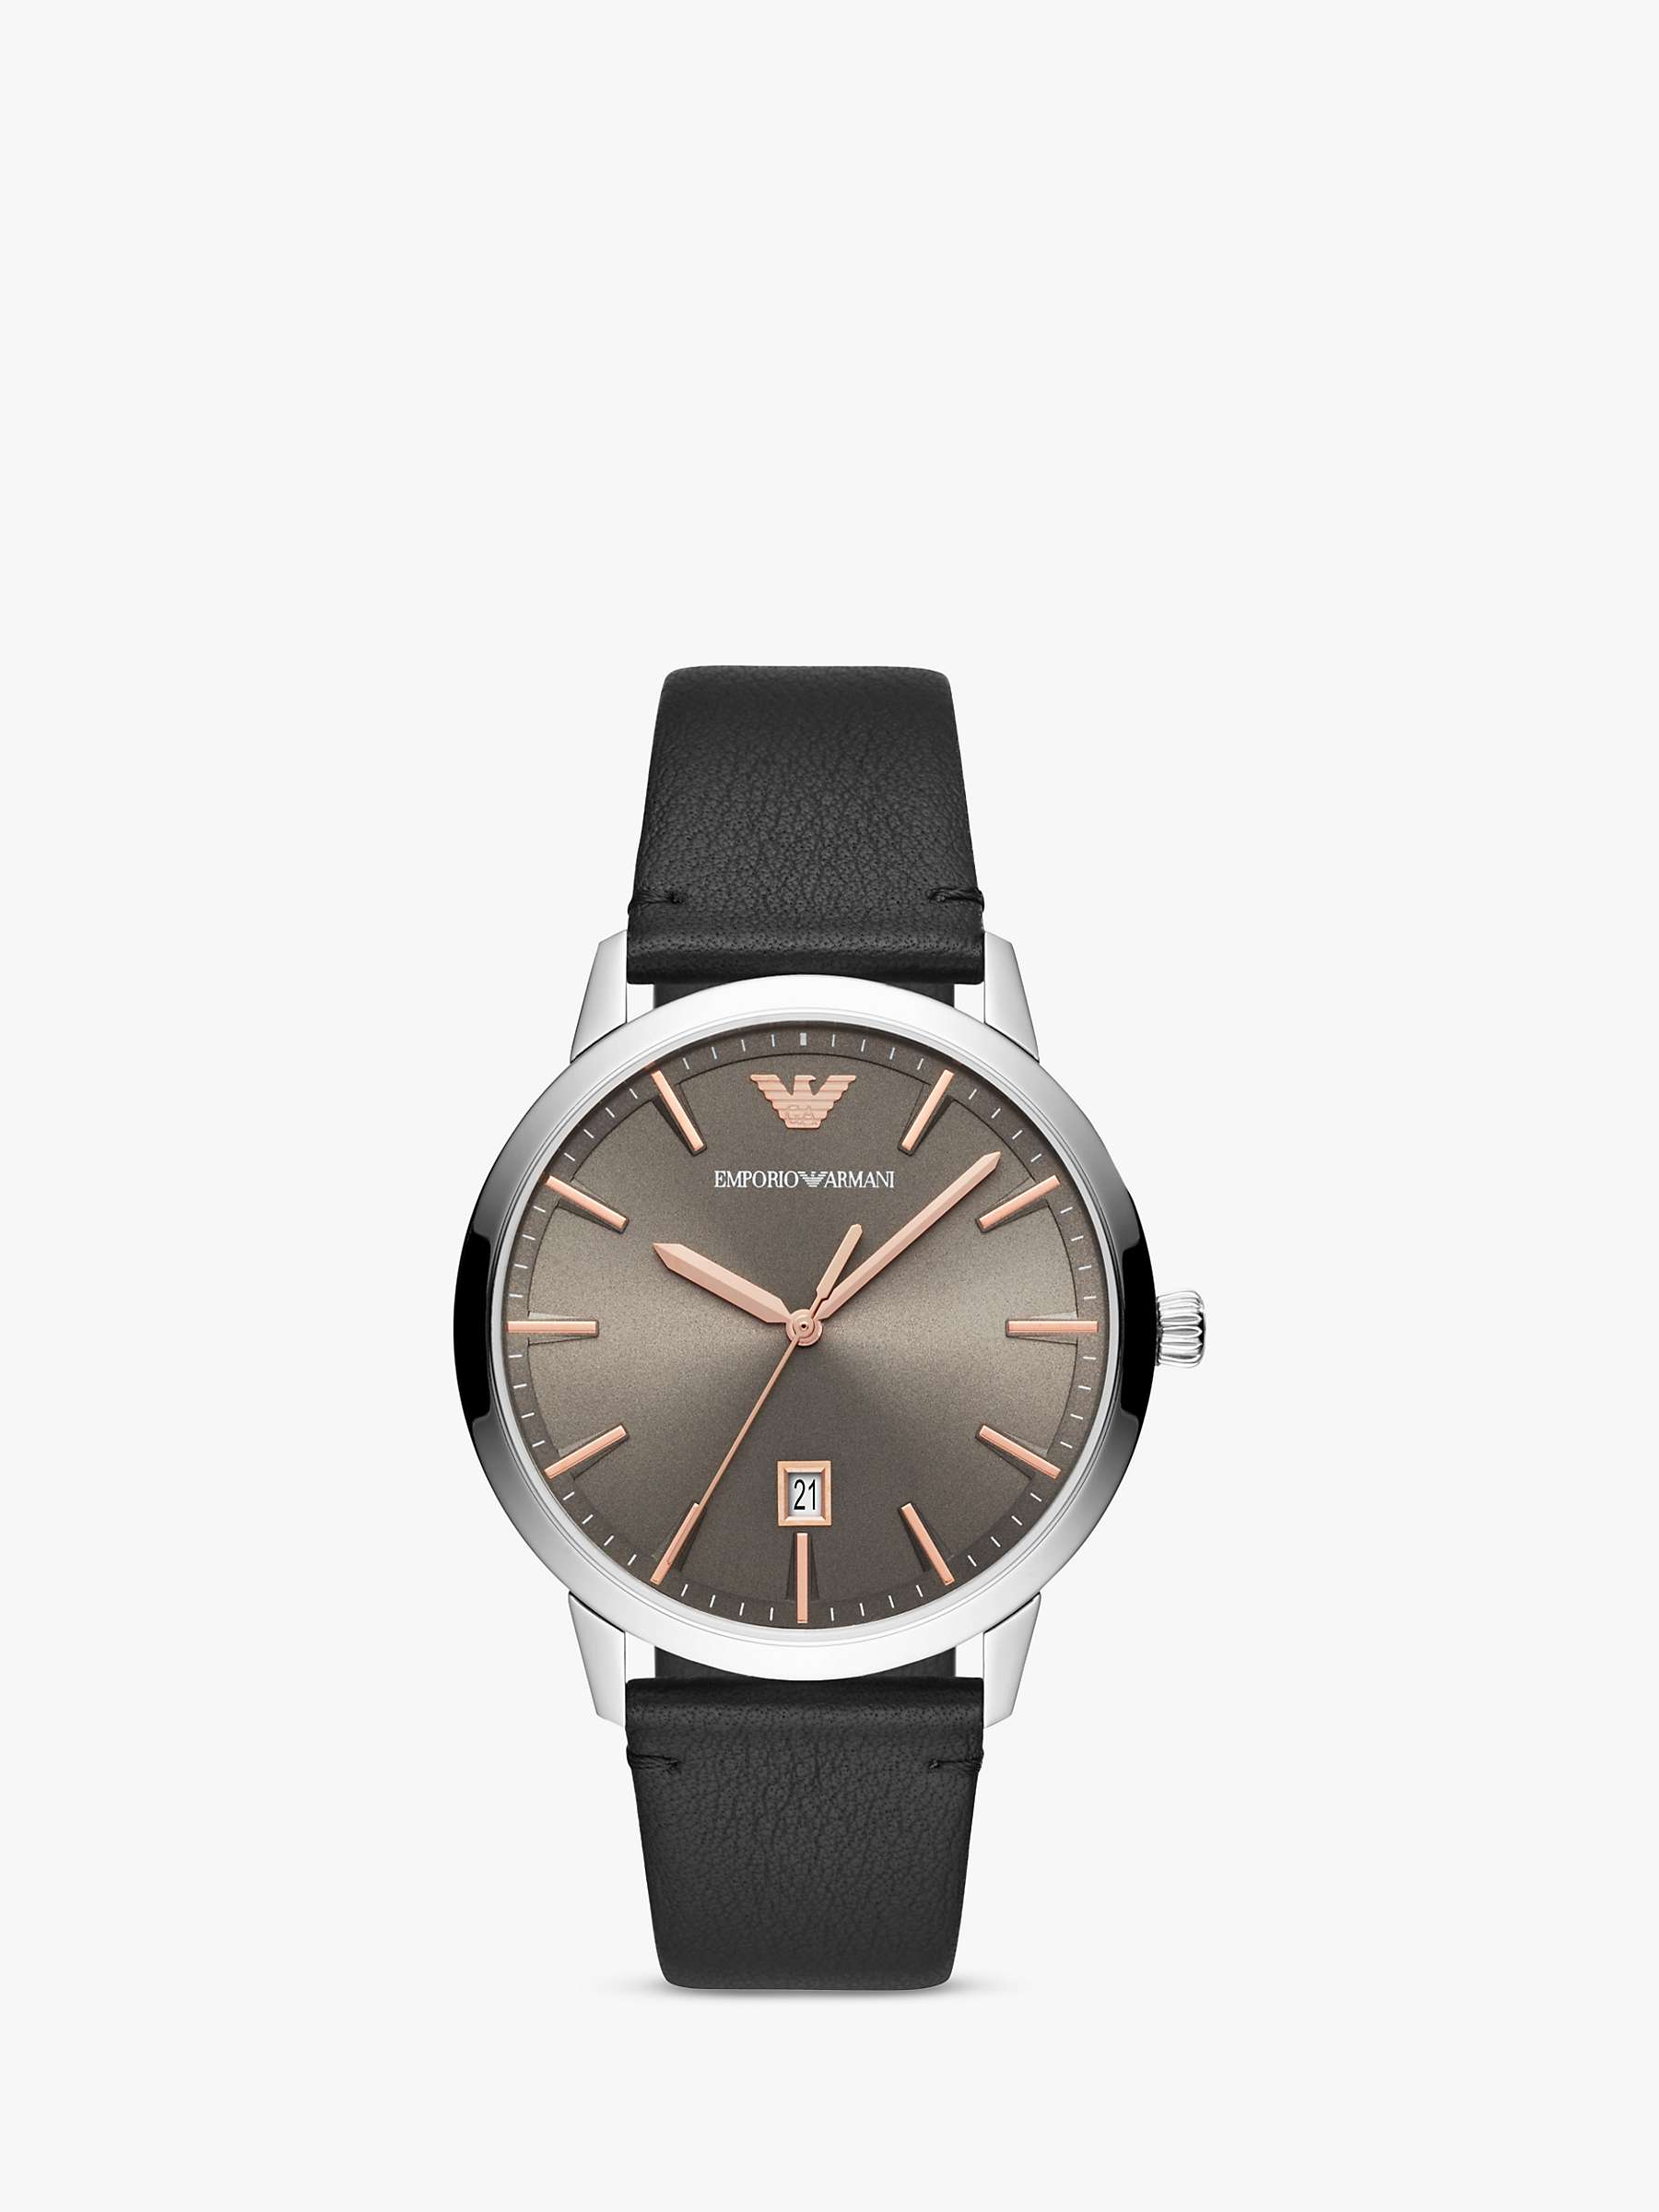 Buy Emporio Armani Men's Date Leather Strap Watch Online at johnlewis.com